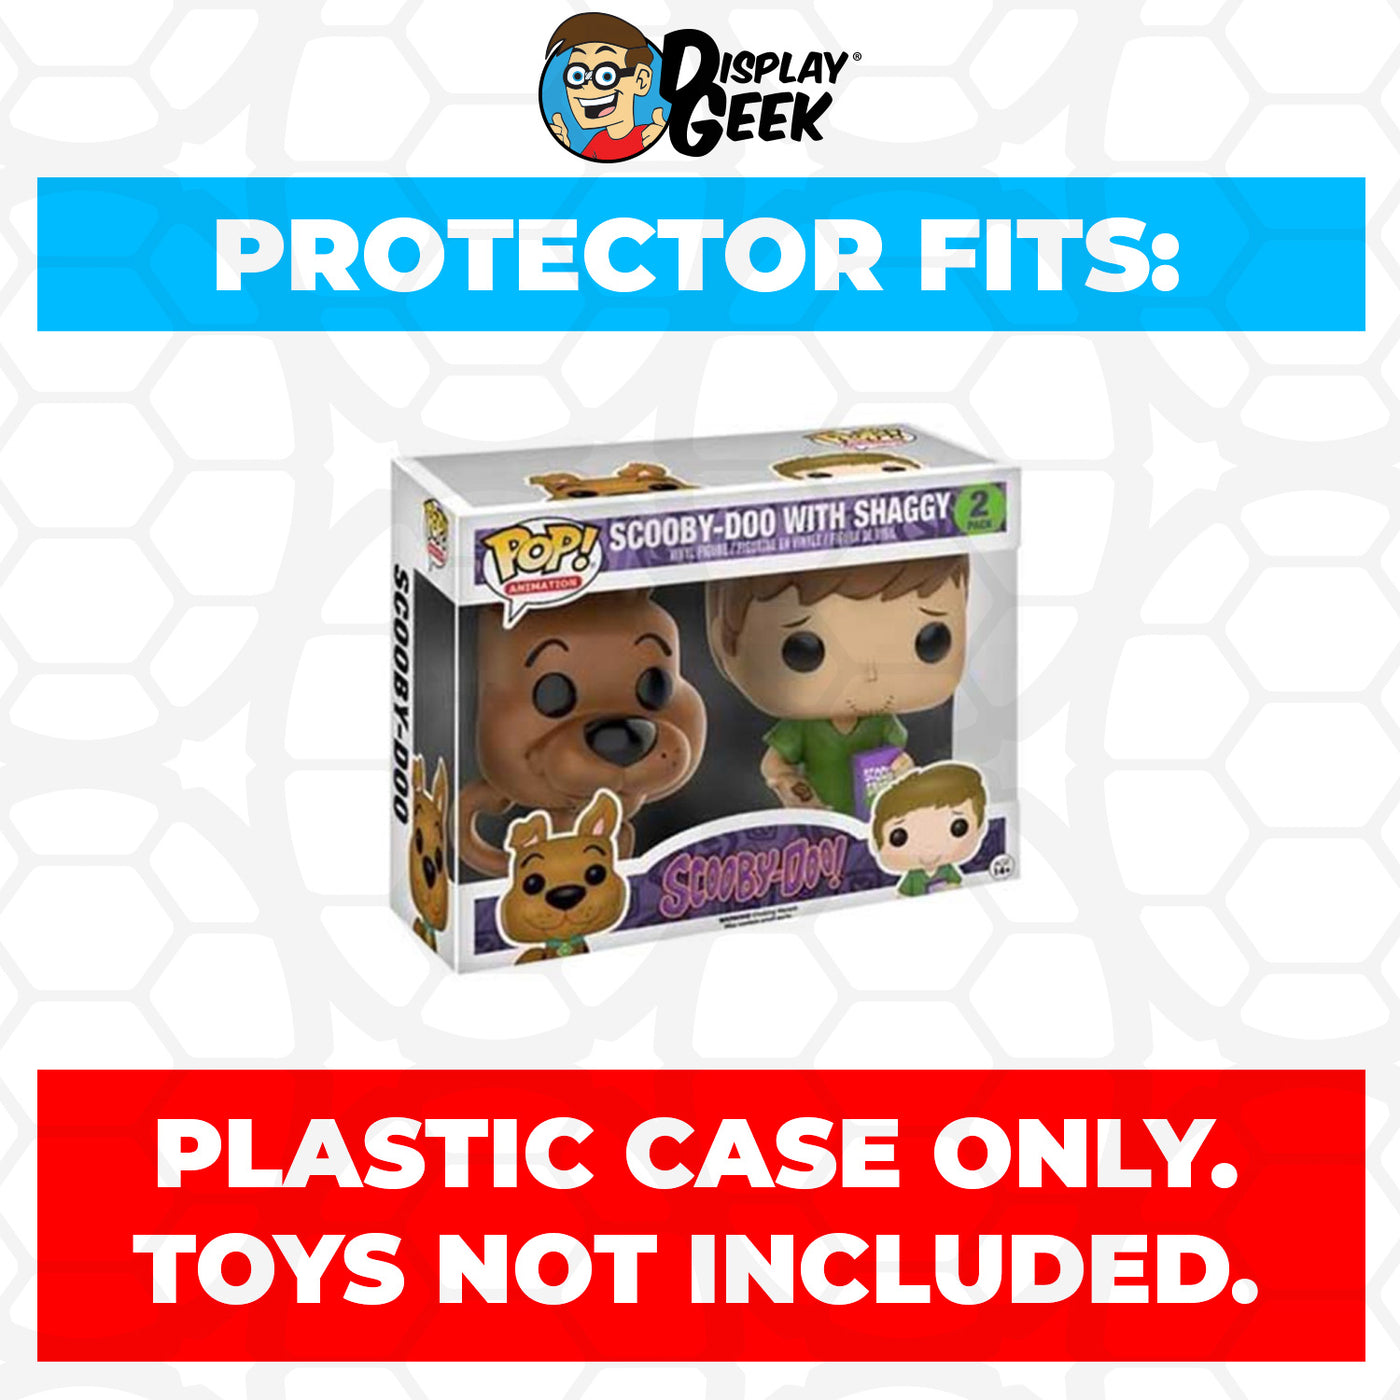 Pop Protector for 2 Pack Scooby-Doo with Shaggy Funko Pop on The Protector Guide App by Display Geek